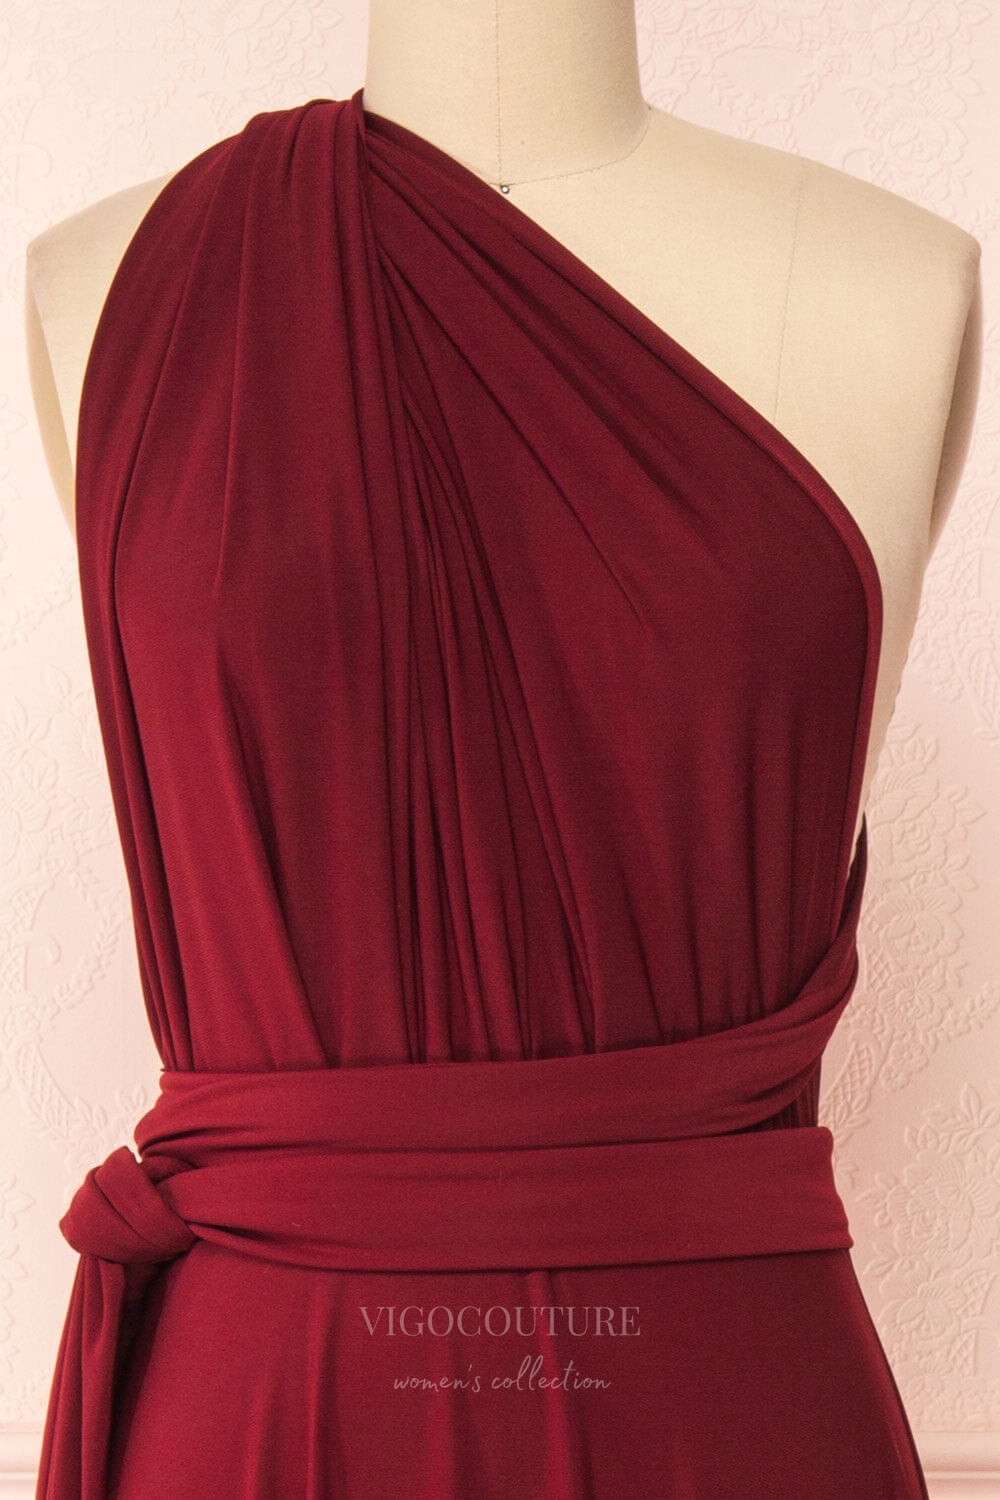 vigocouture-Convertible Bridesmaid Dress Stretchable Woven Dress Pleated Prom Dress Multiway Dress 20860-Burgundy-Prom Dresses-vigocouture-